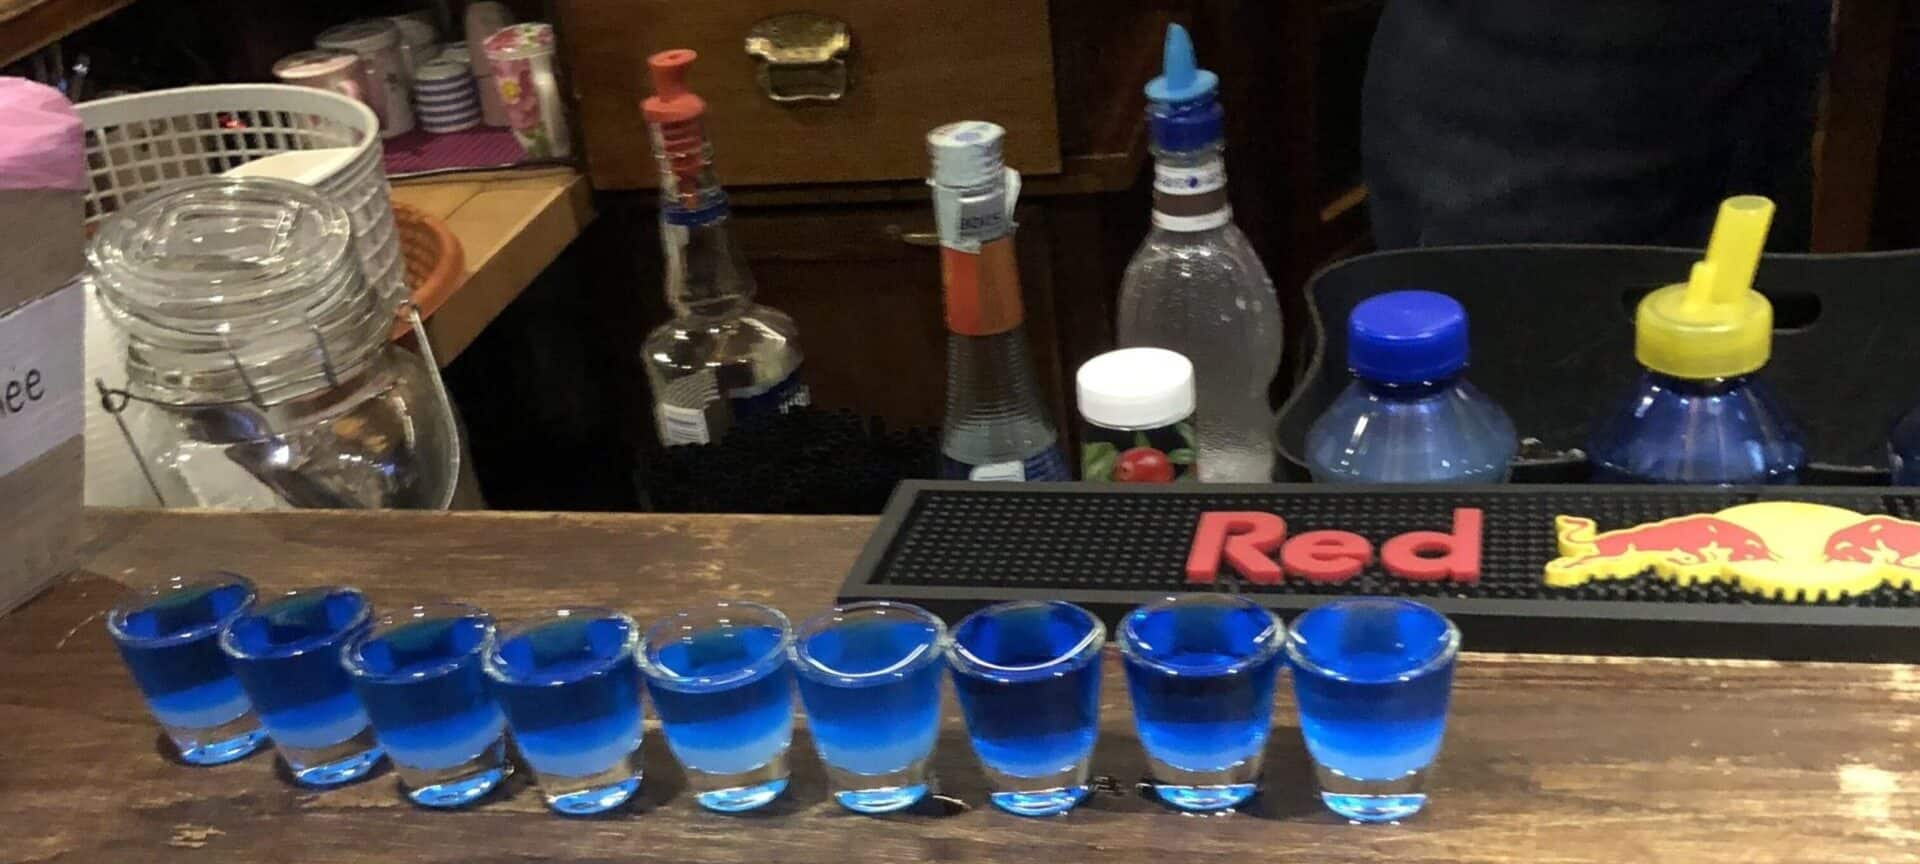 Blue shots of liquor being served in a rustic bar in Urbino